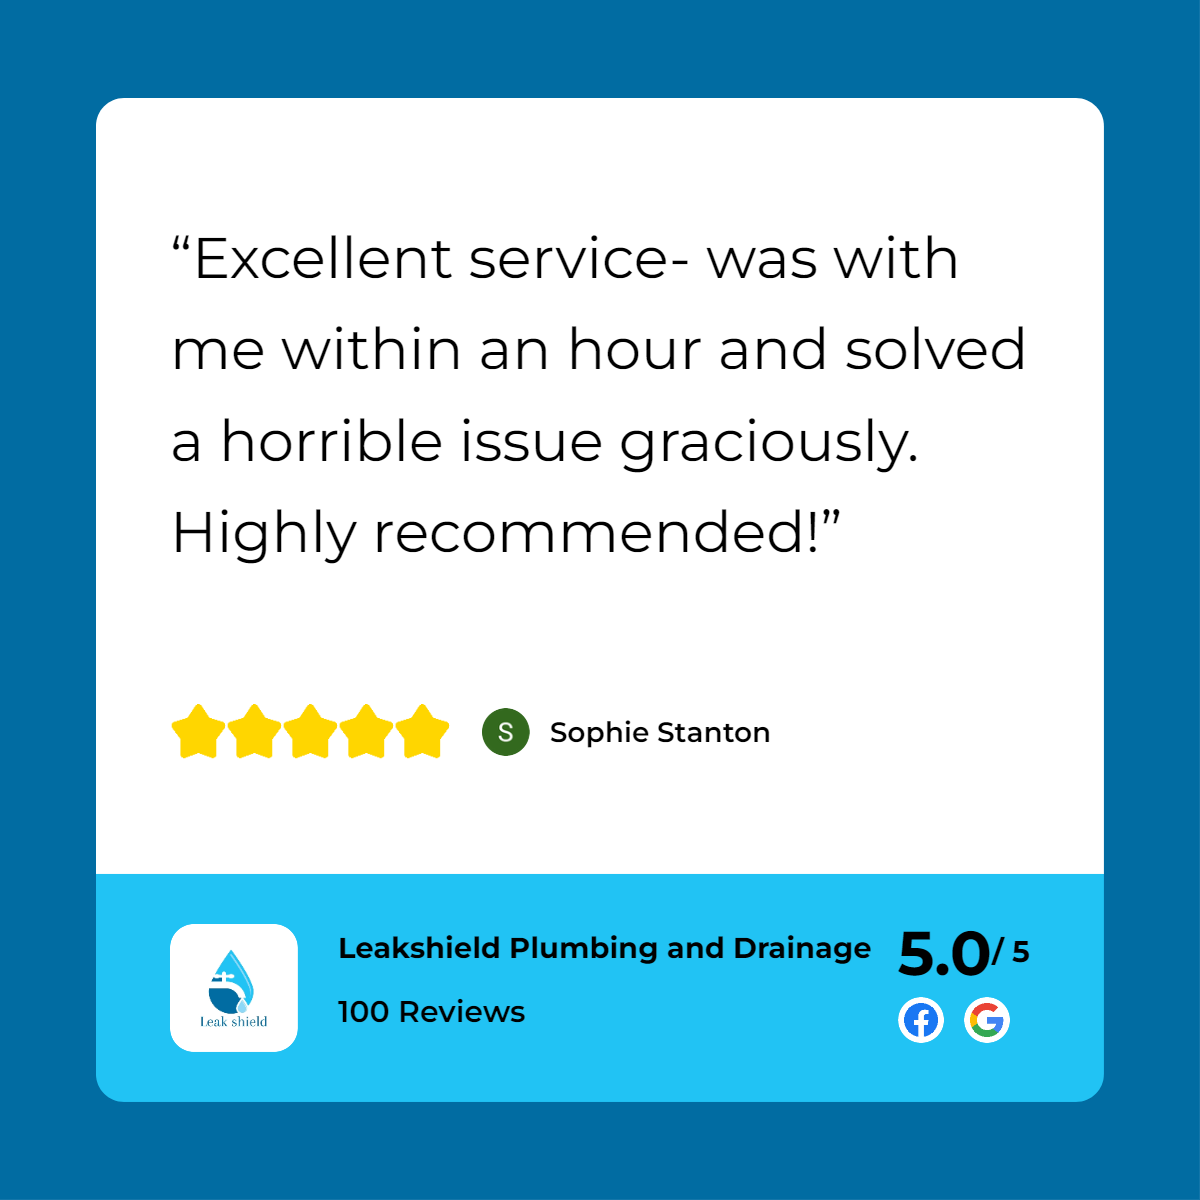 A customer review for leeds plumbing.